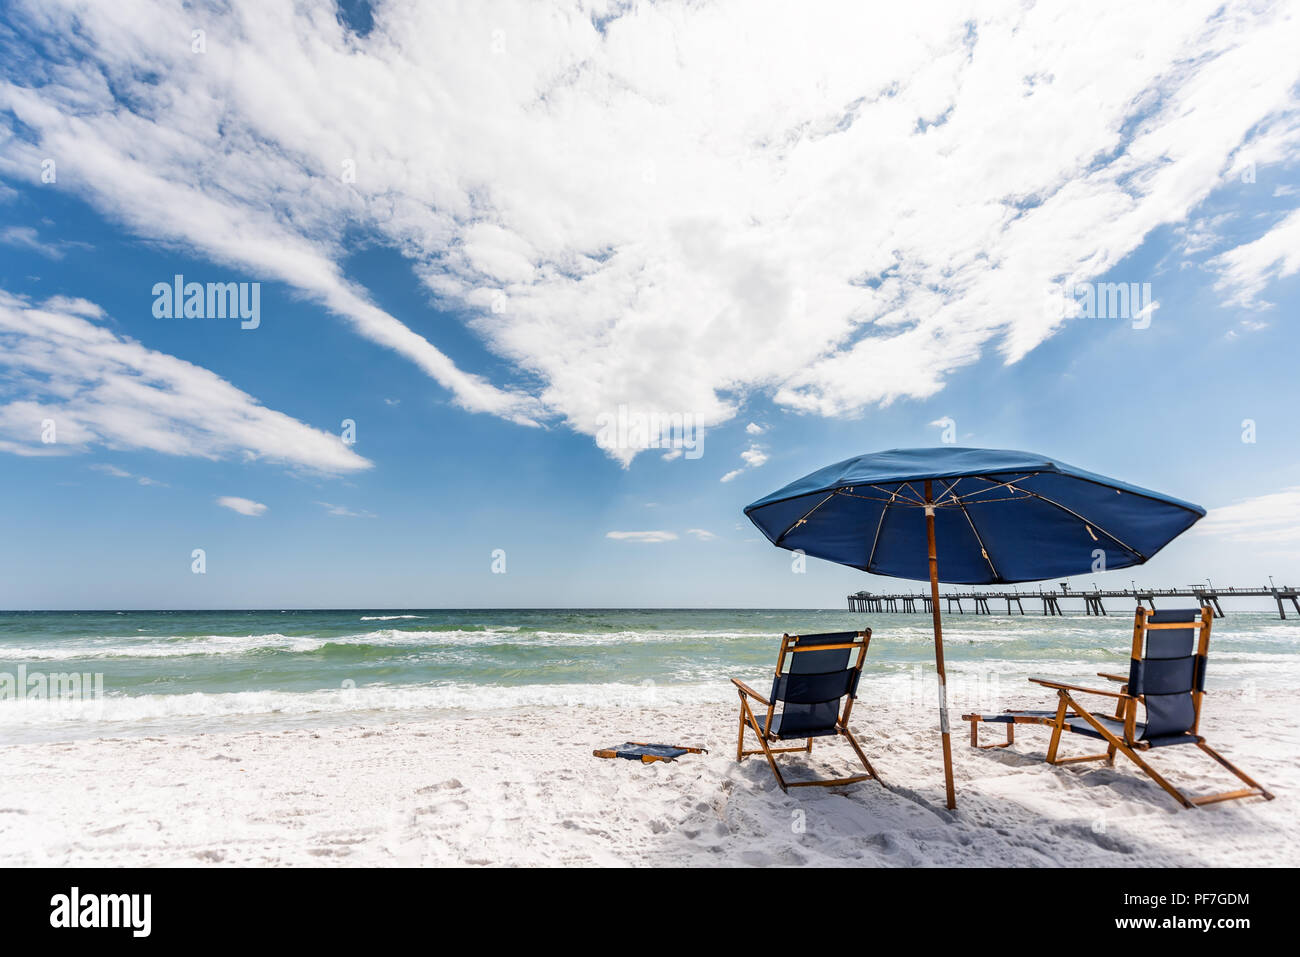 https://c8.alamy.com/comp/PF7GDM/okaloosa-fishing-pier-in-fort-walton-beach-florida-during-day-in-panhandle-gulf-of-mexico-during-sunny-day-two-empty-beach-chairs-and-umbrella-PF7GDM.jpg